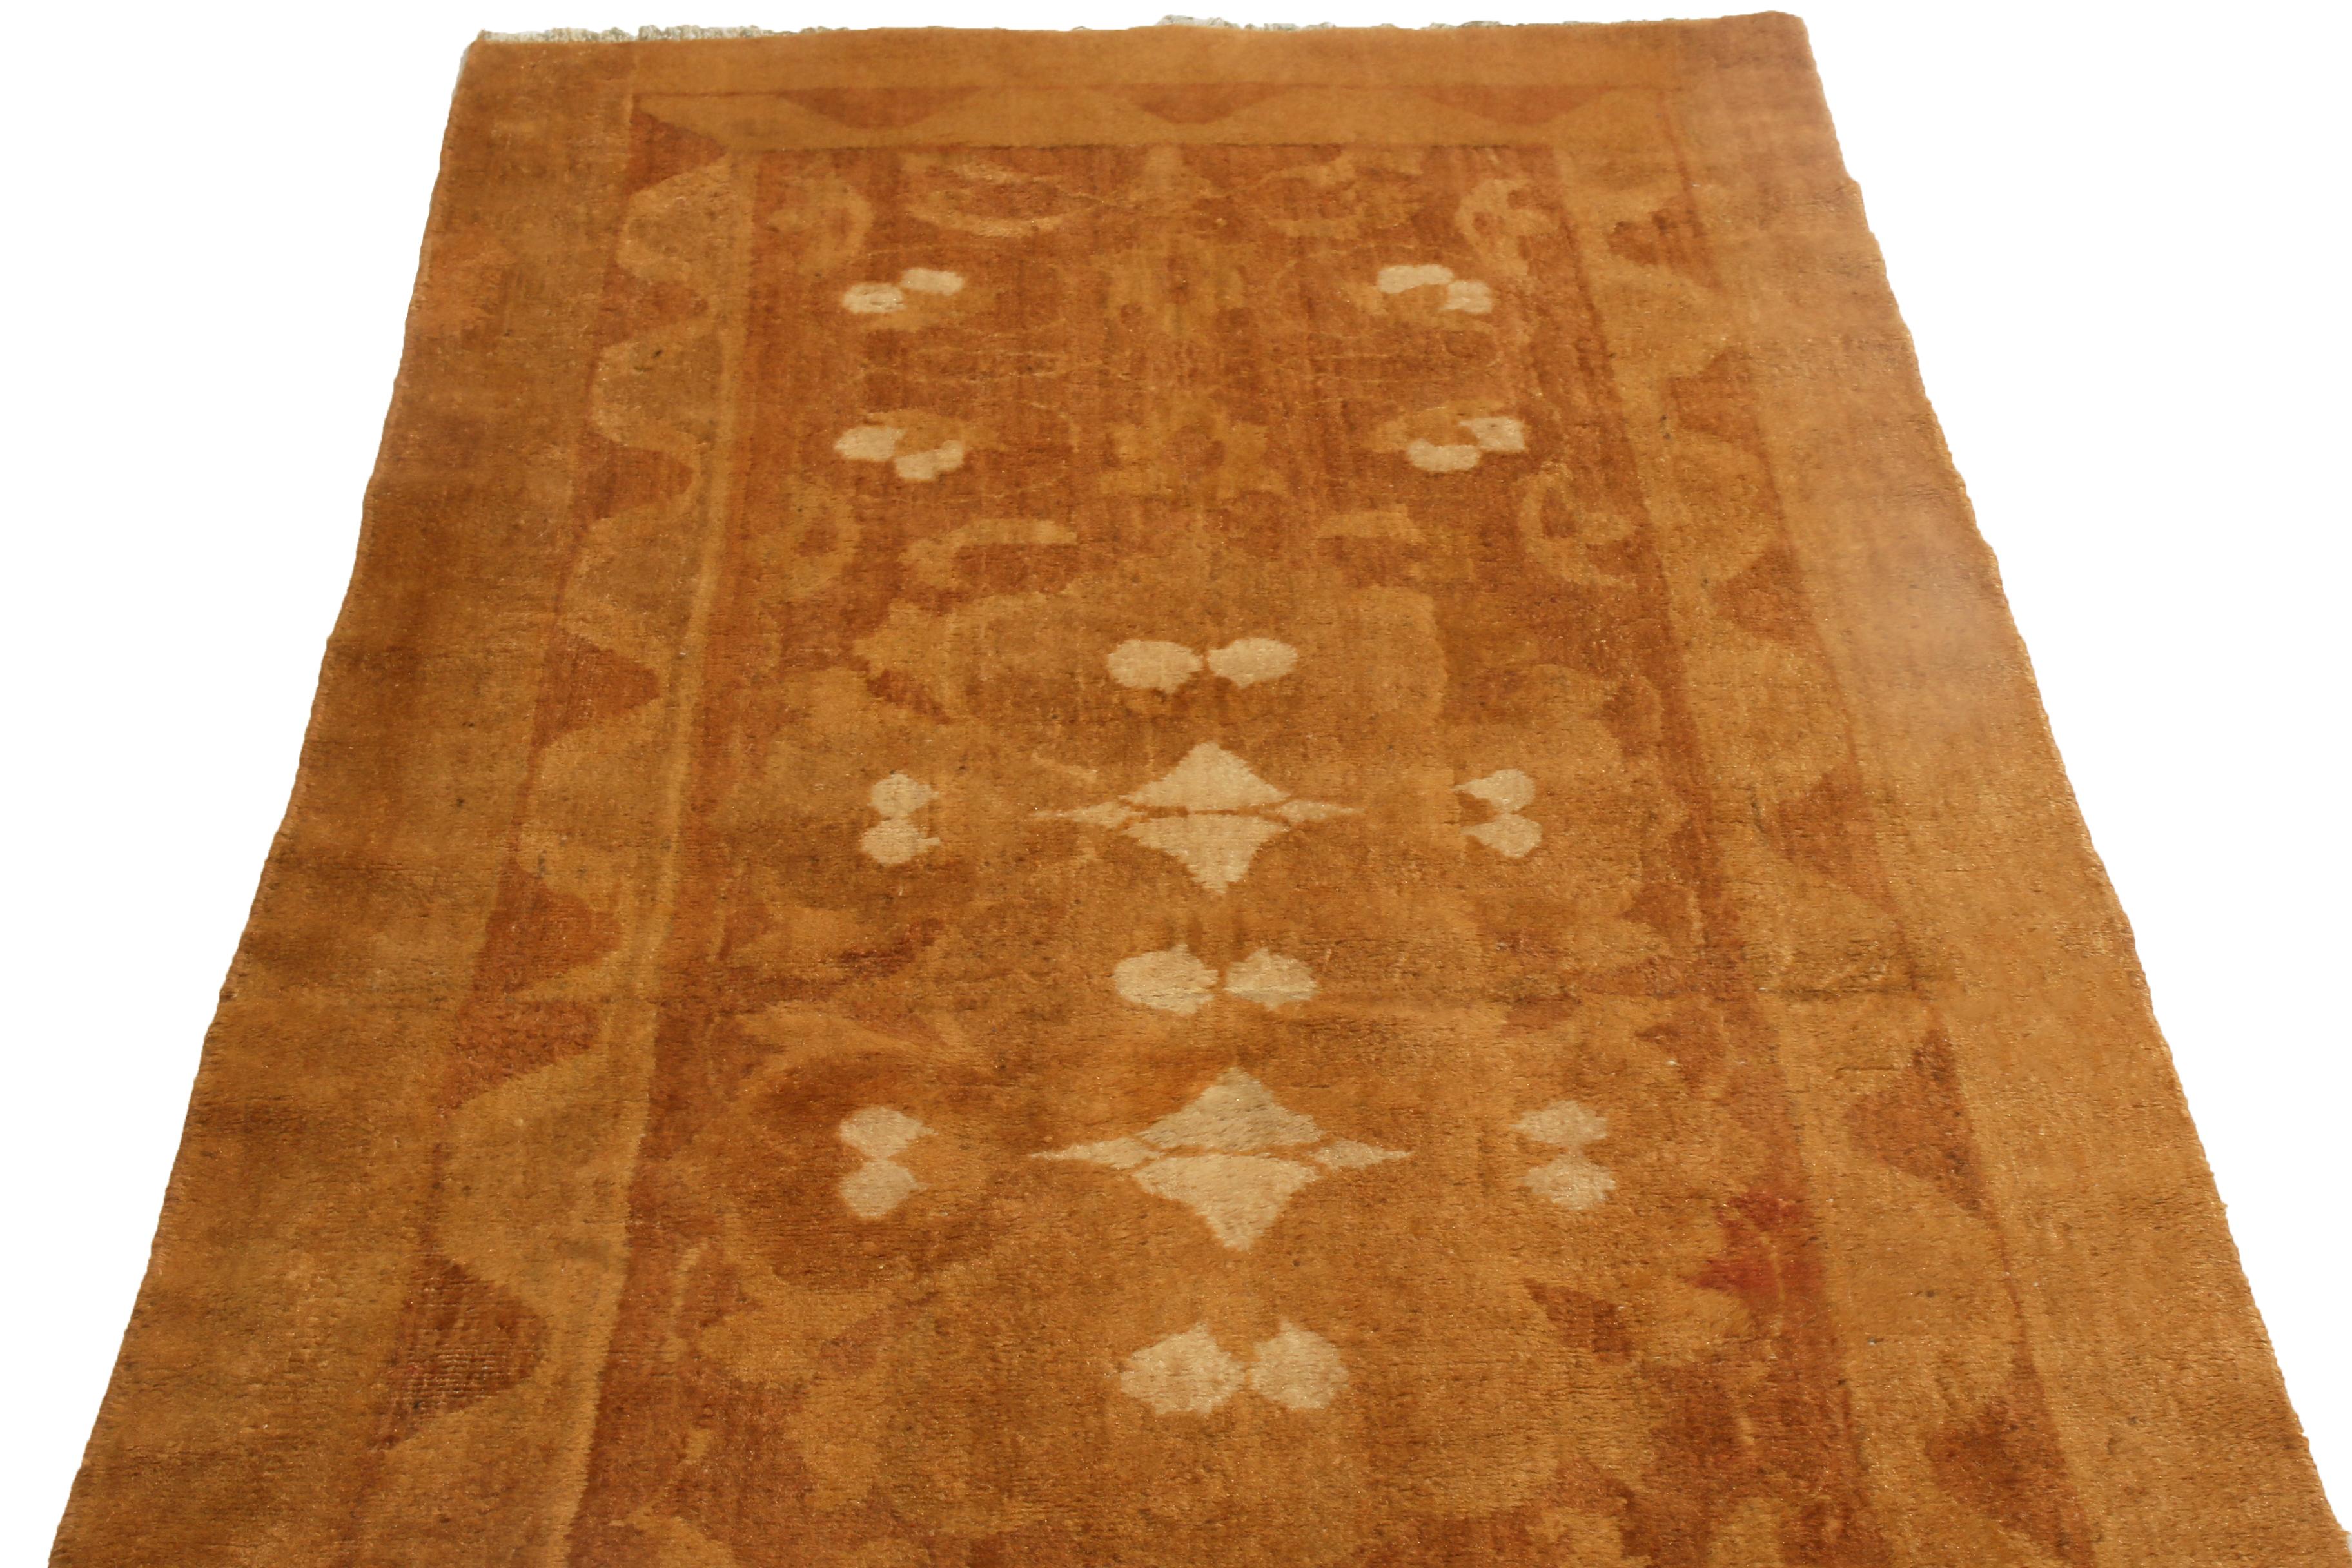 Originating from India, this antique Agra runner is hand knotted hails from a select family with a particularly luminous, high quality wool body, featuring a uniquely minimalist geometric-floral pattern in a multi-bordered, perfectly mirrored field